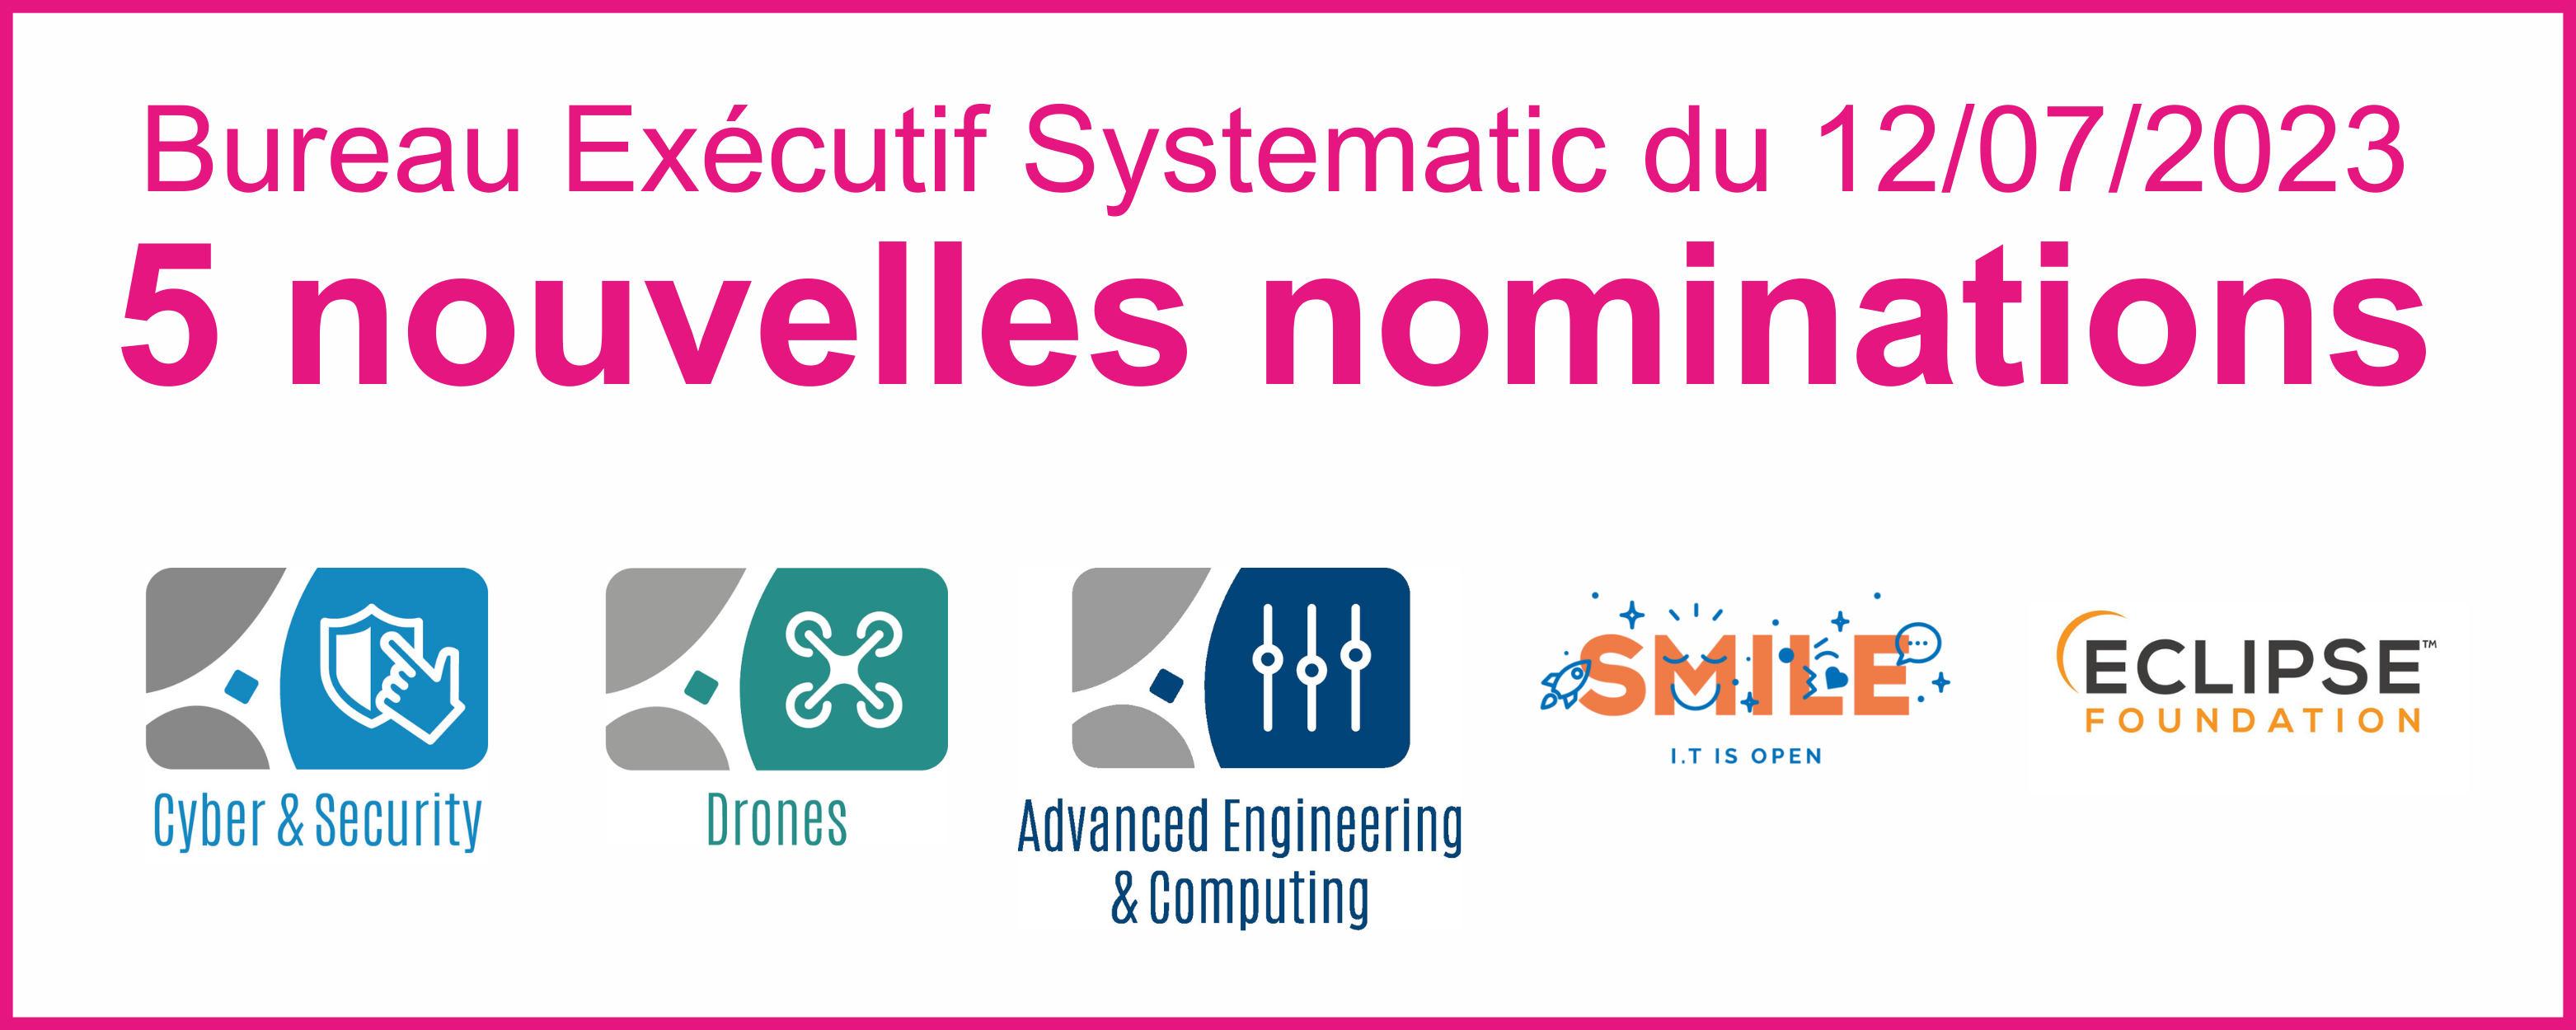 5 nominations d’importance chez Systematic !